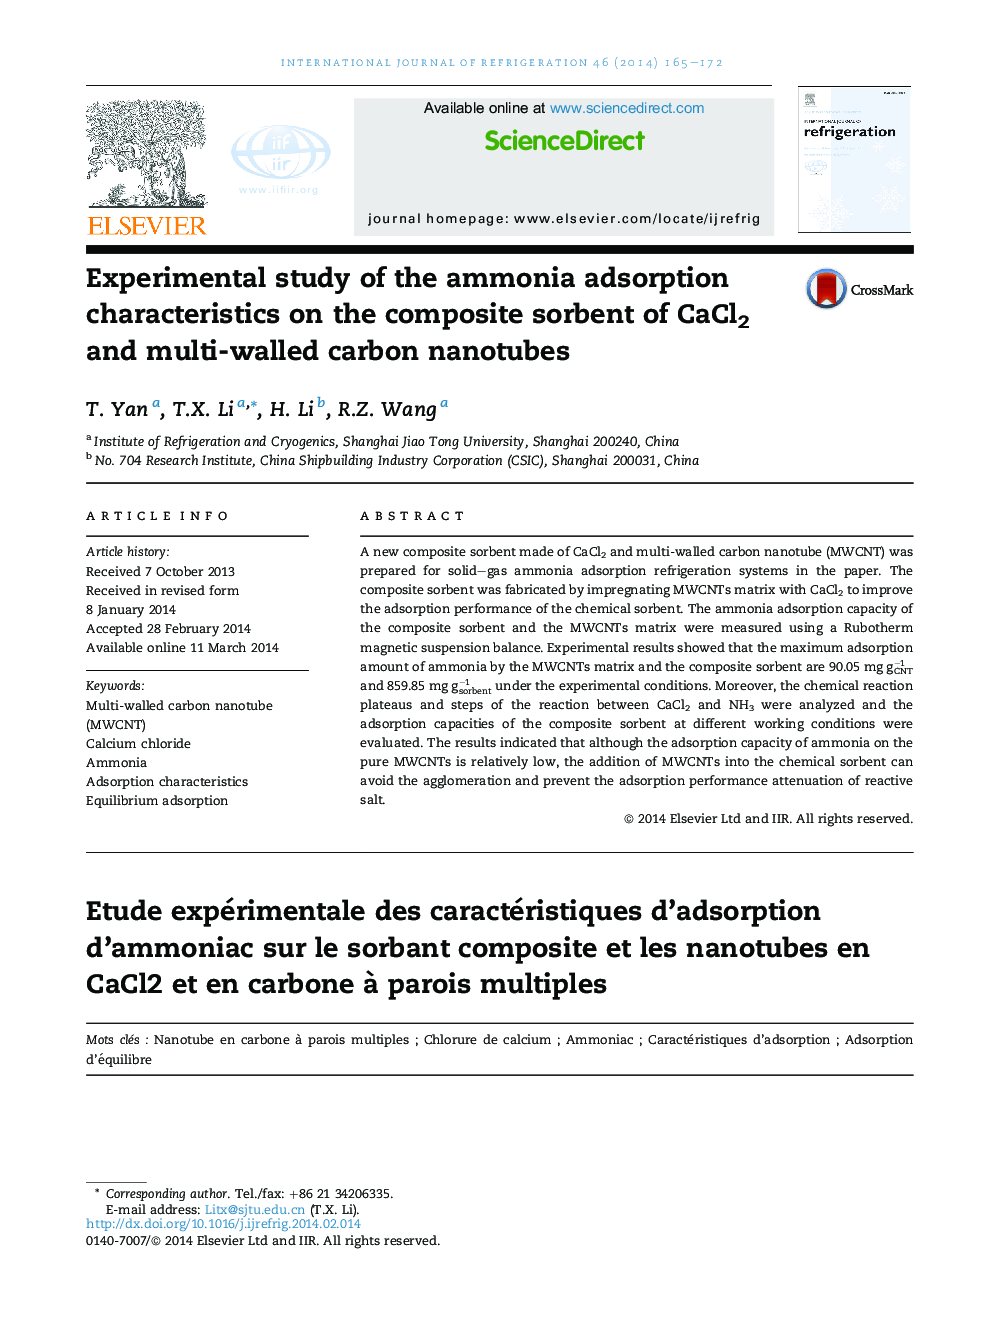 Experimental study of the ammonia adsorption characteristics on the composite sorbent of CaCl2 and multi-walled carbon nanotubes